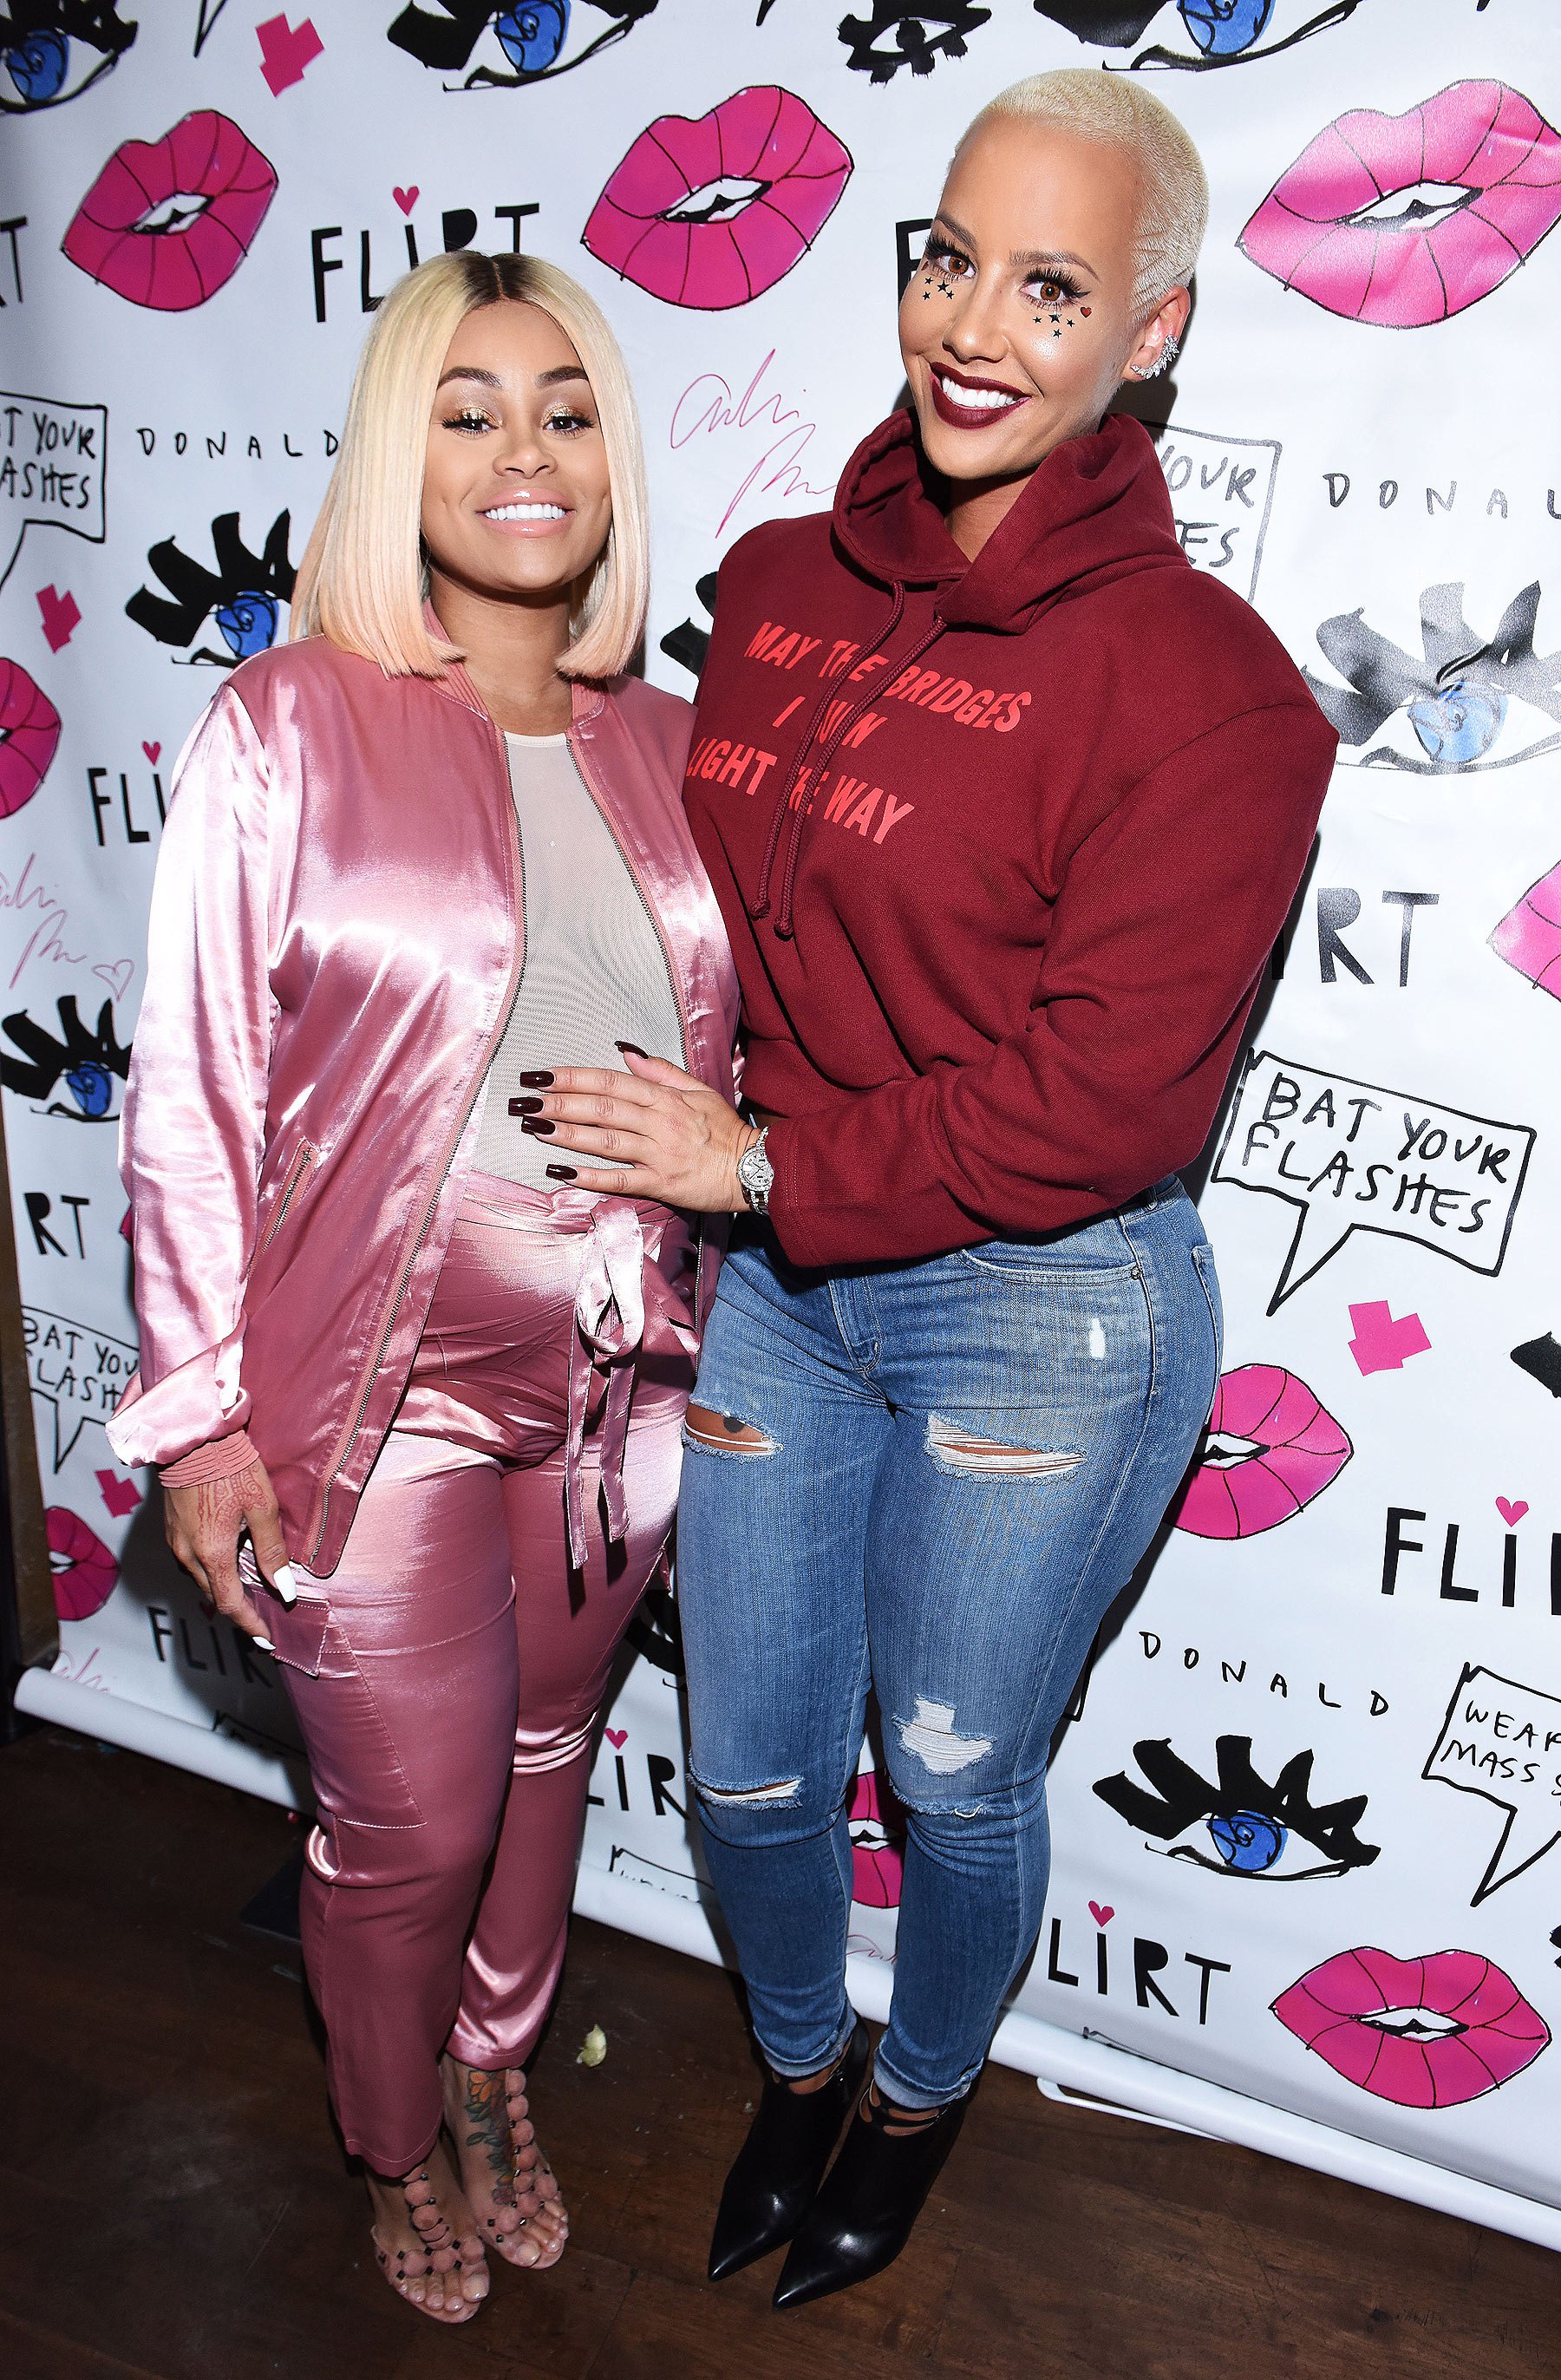 LOS ANGELES, CA - OCTOBER 20: Blac Chyna and Amber Rose attend Flirt Cosmetics x Amber Rose Event on October 20, 2016 in Los Angeles, California. (Photo by Vivien Killilea/Getty Images for Flirt Cosmetics)